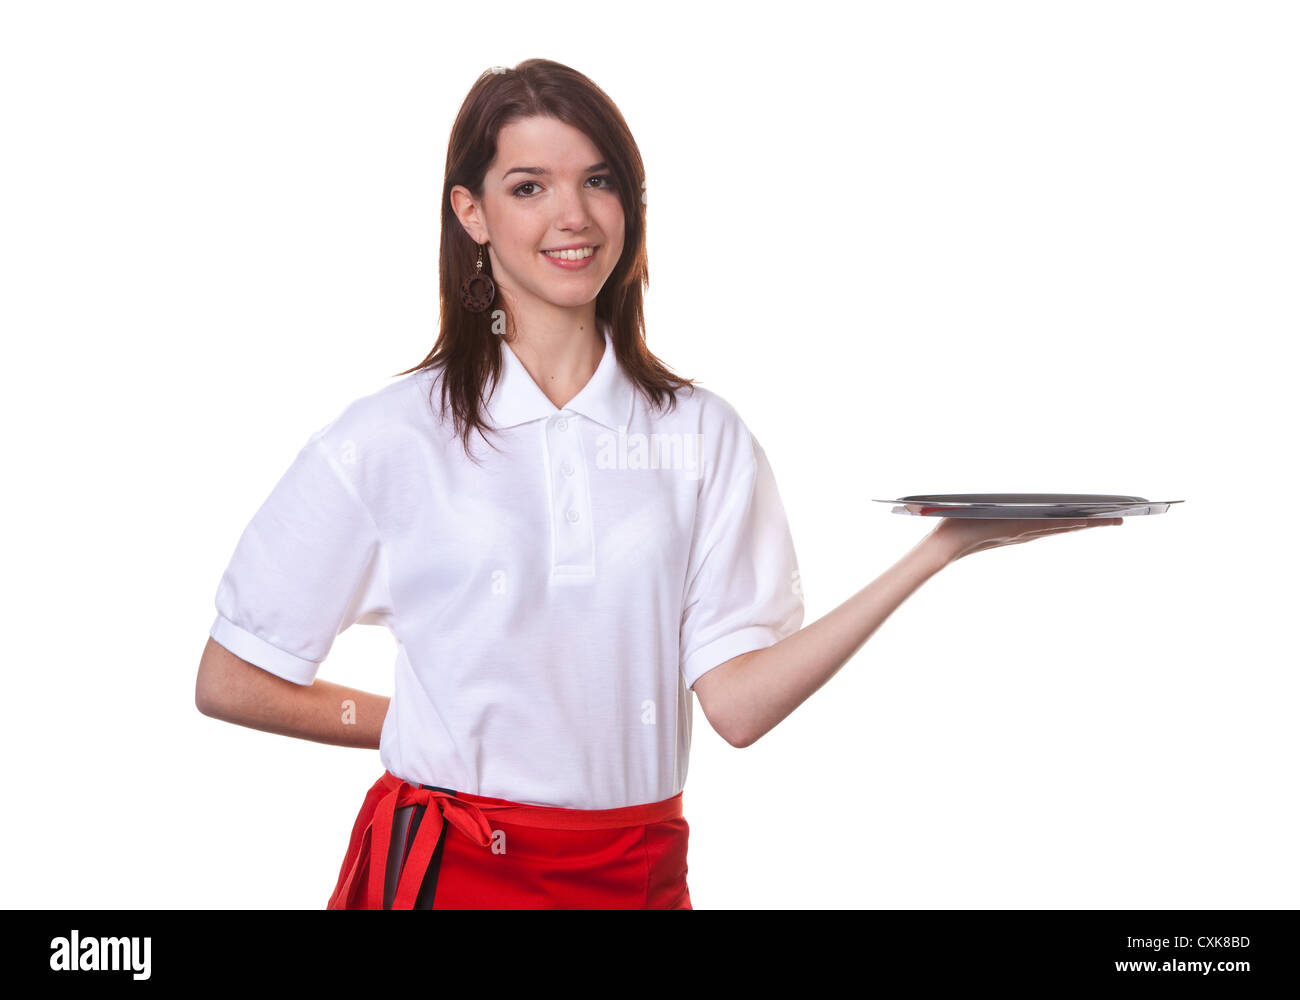 Young service lady serving cocktails Young woman serving drinks on a tablet Stock Photo